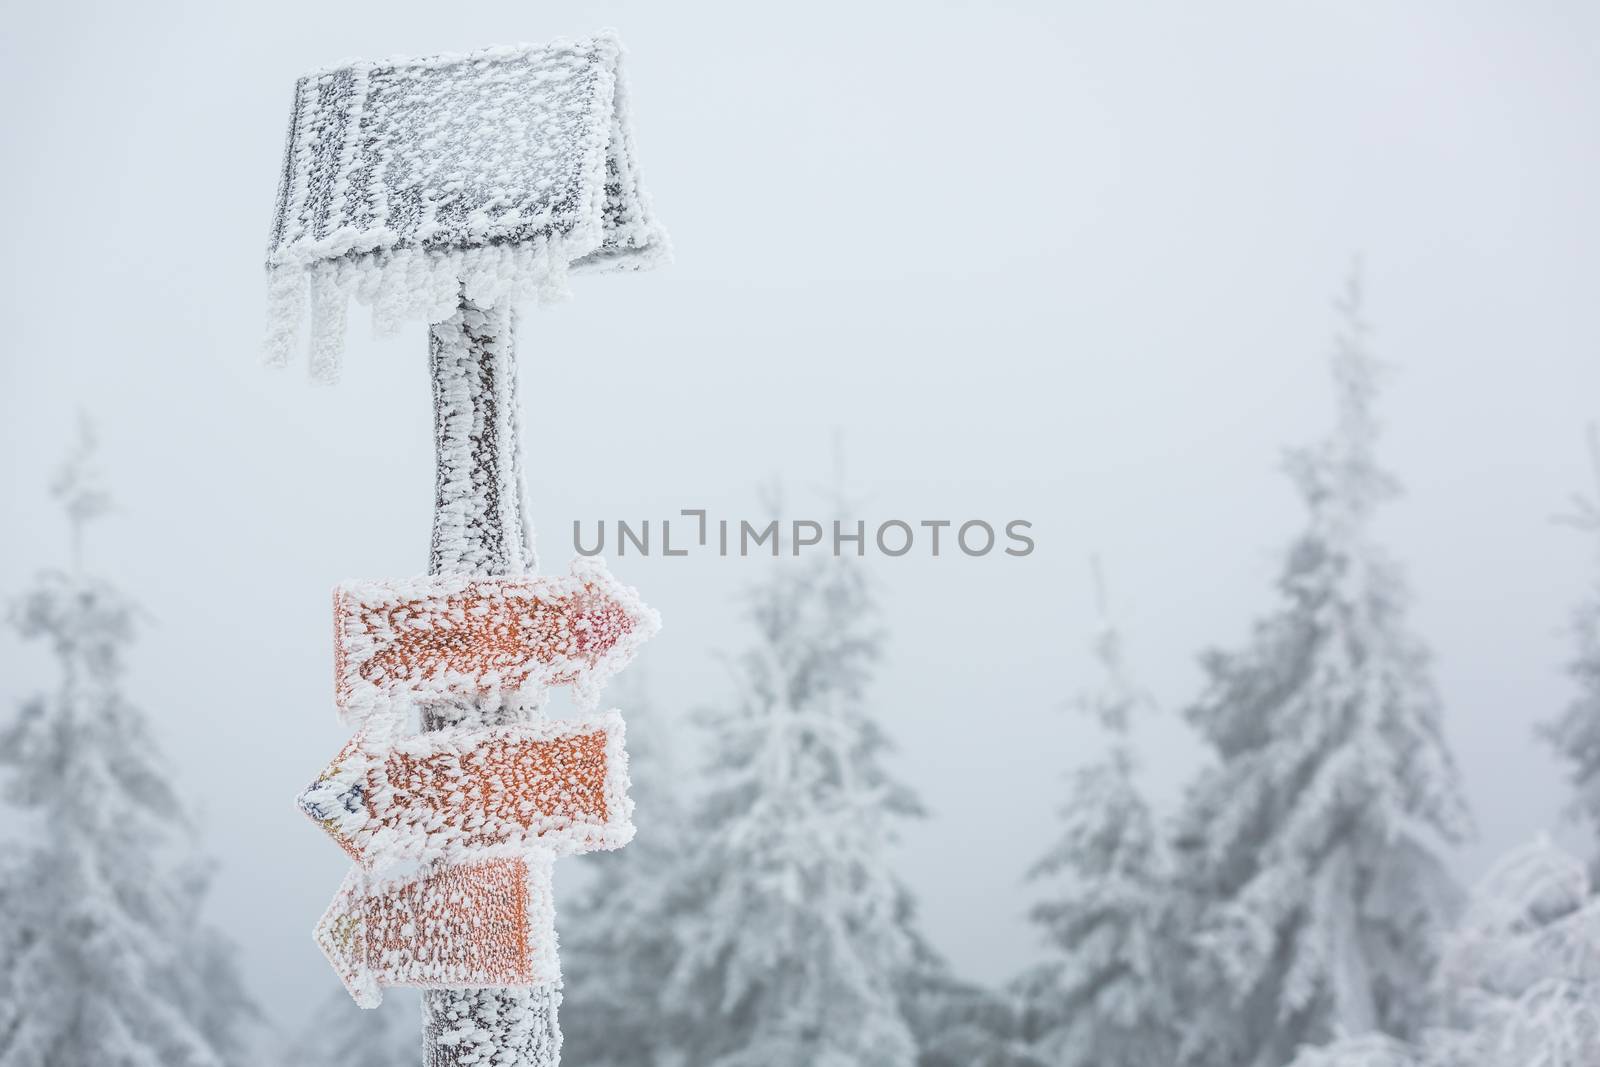 Extreme winter weather - hiking path sign covered with snow brought by strong wind during snowstorm